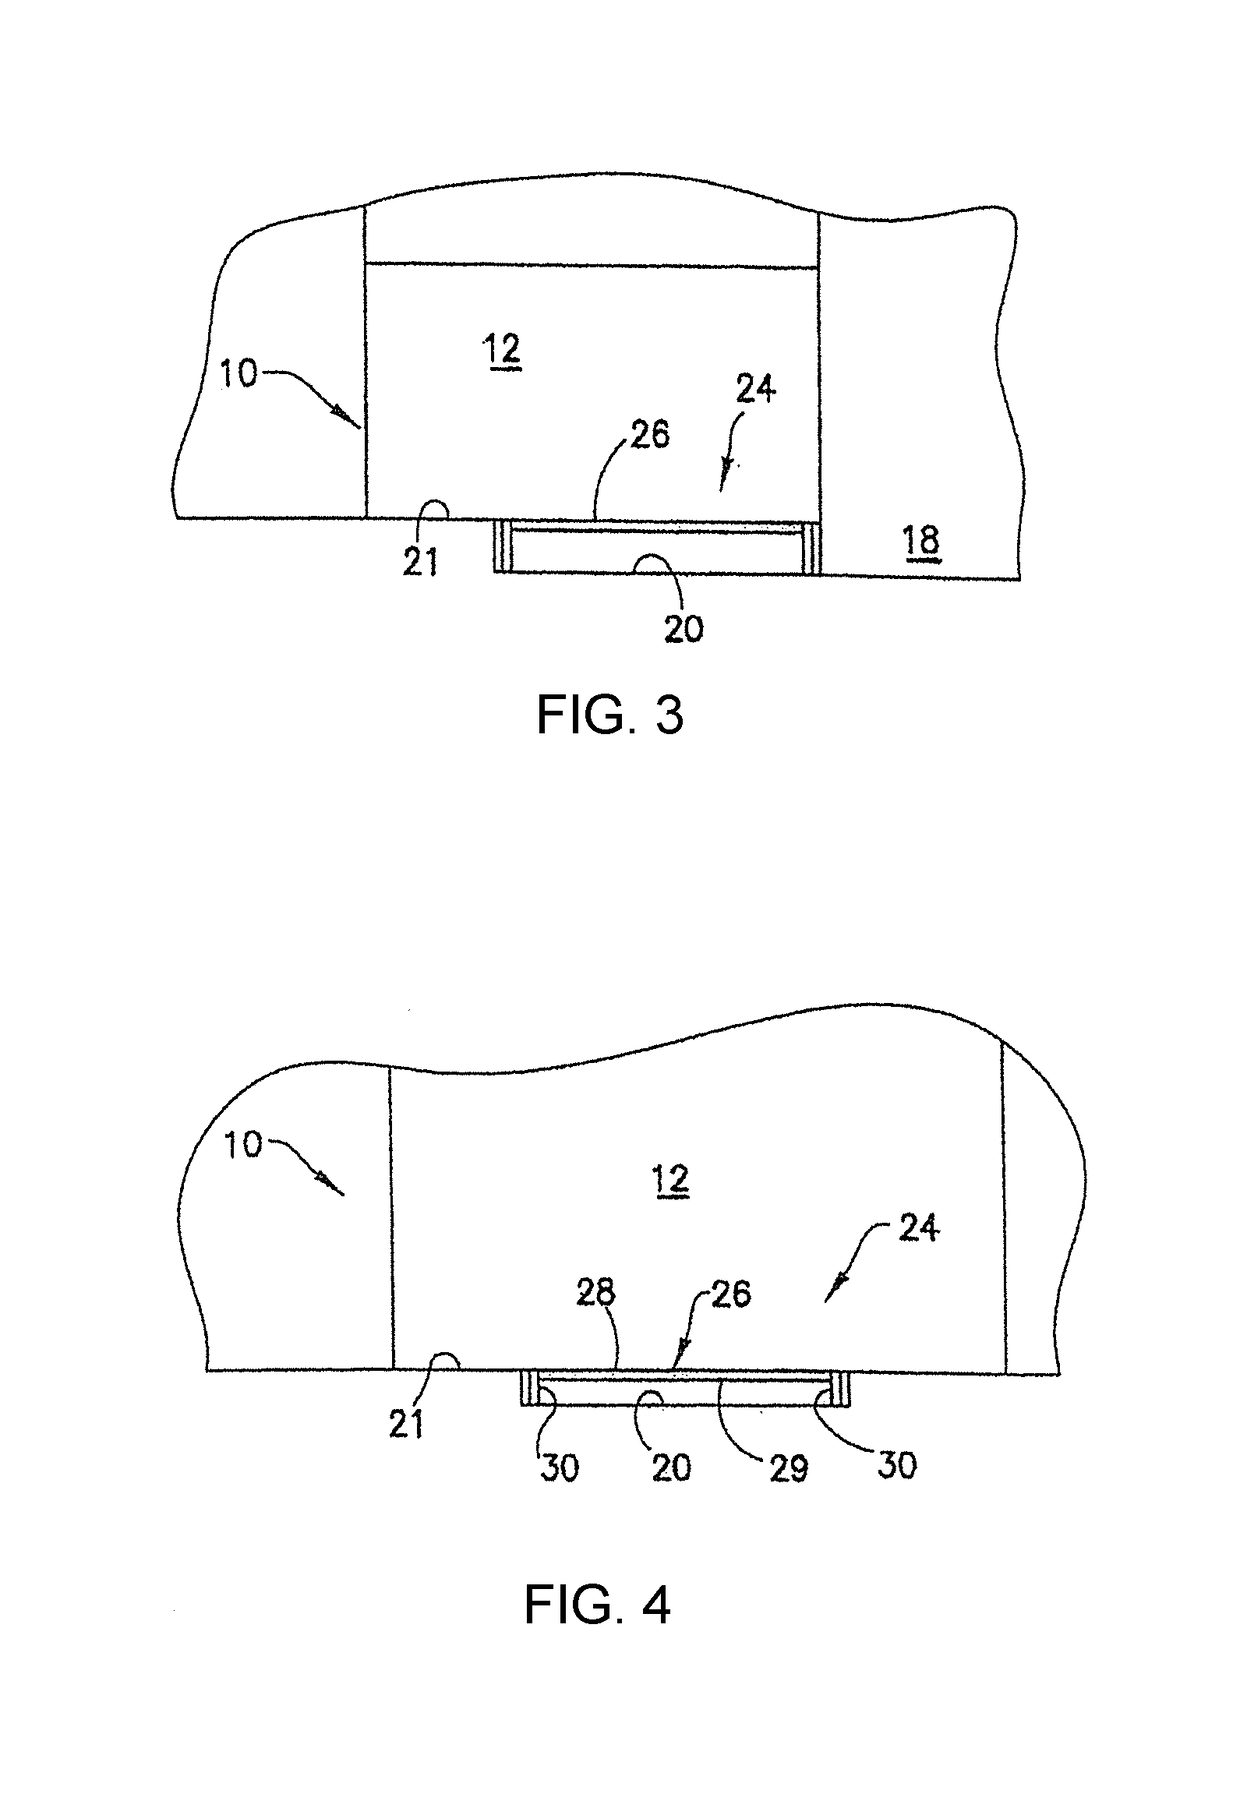 Vehicle parking with automated guided vehicles, vertically reciprocating conveyors and safety barriers